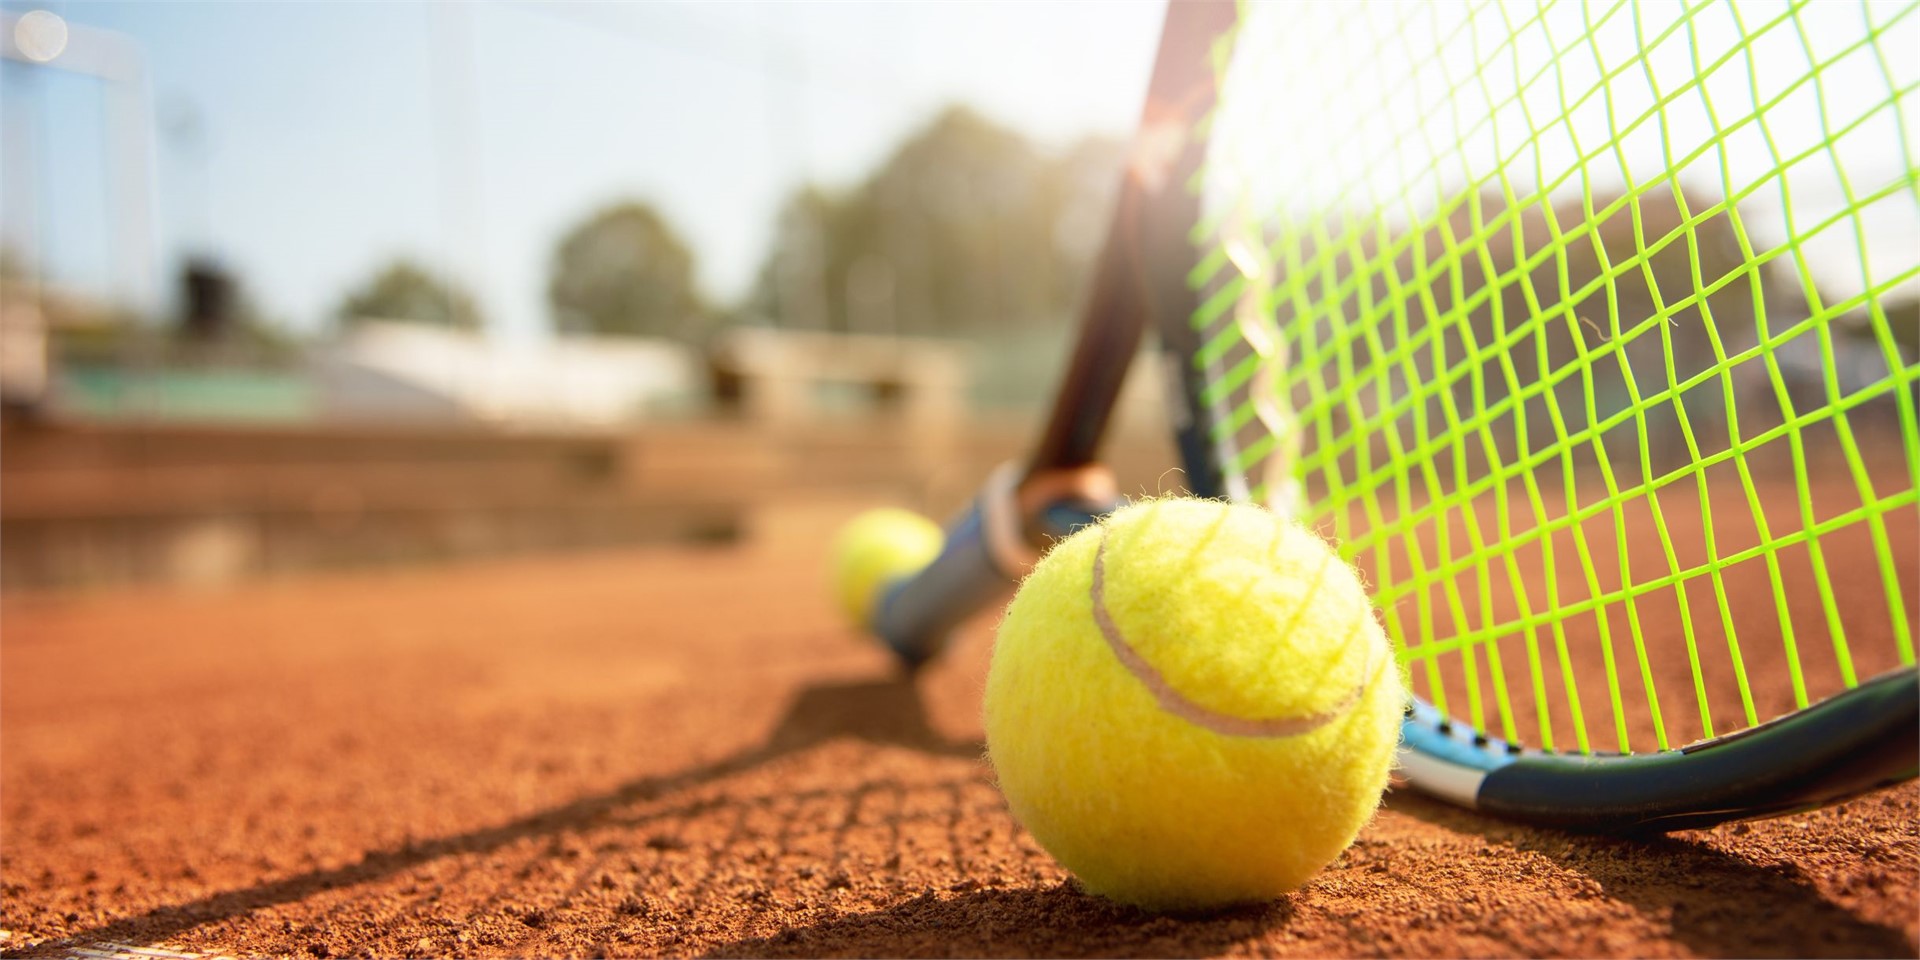 Book your trip to the French Open in Paris
